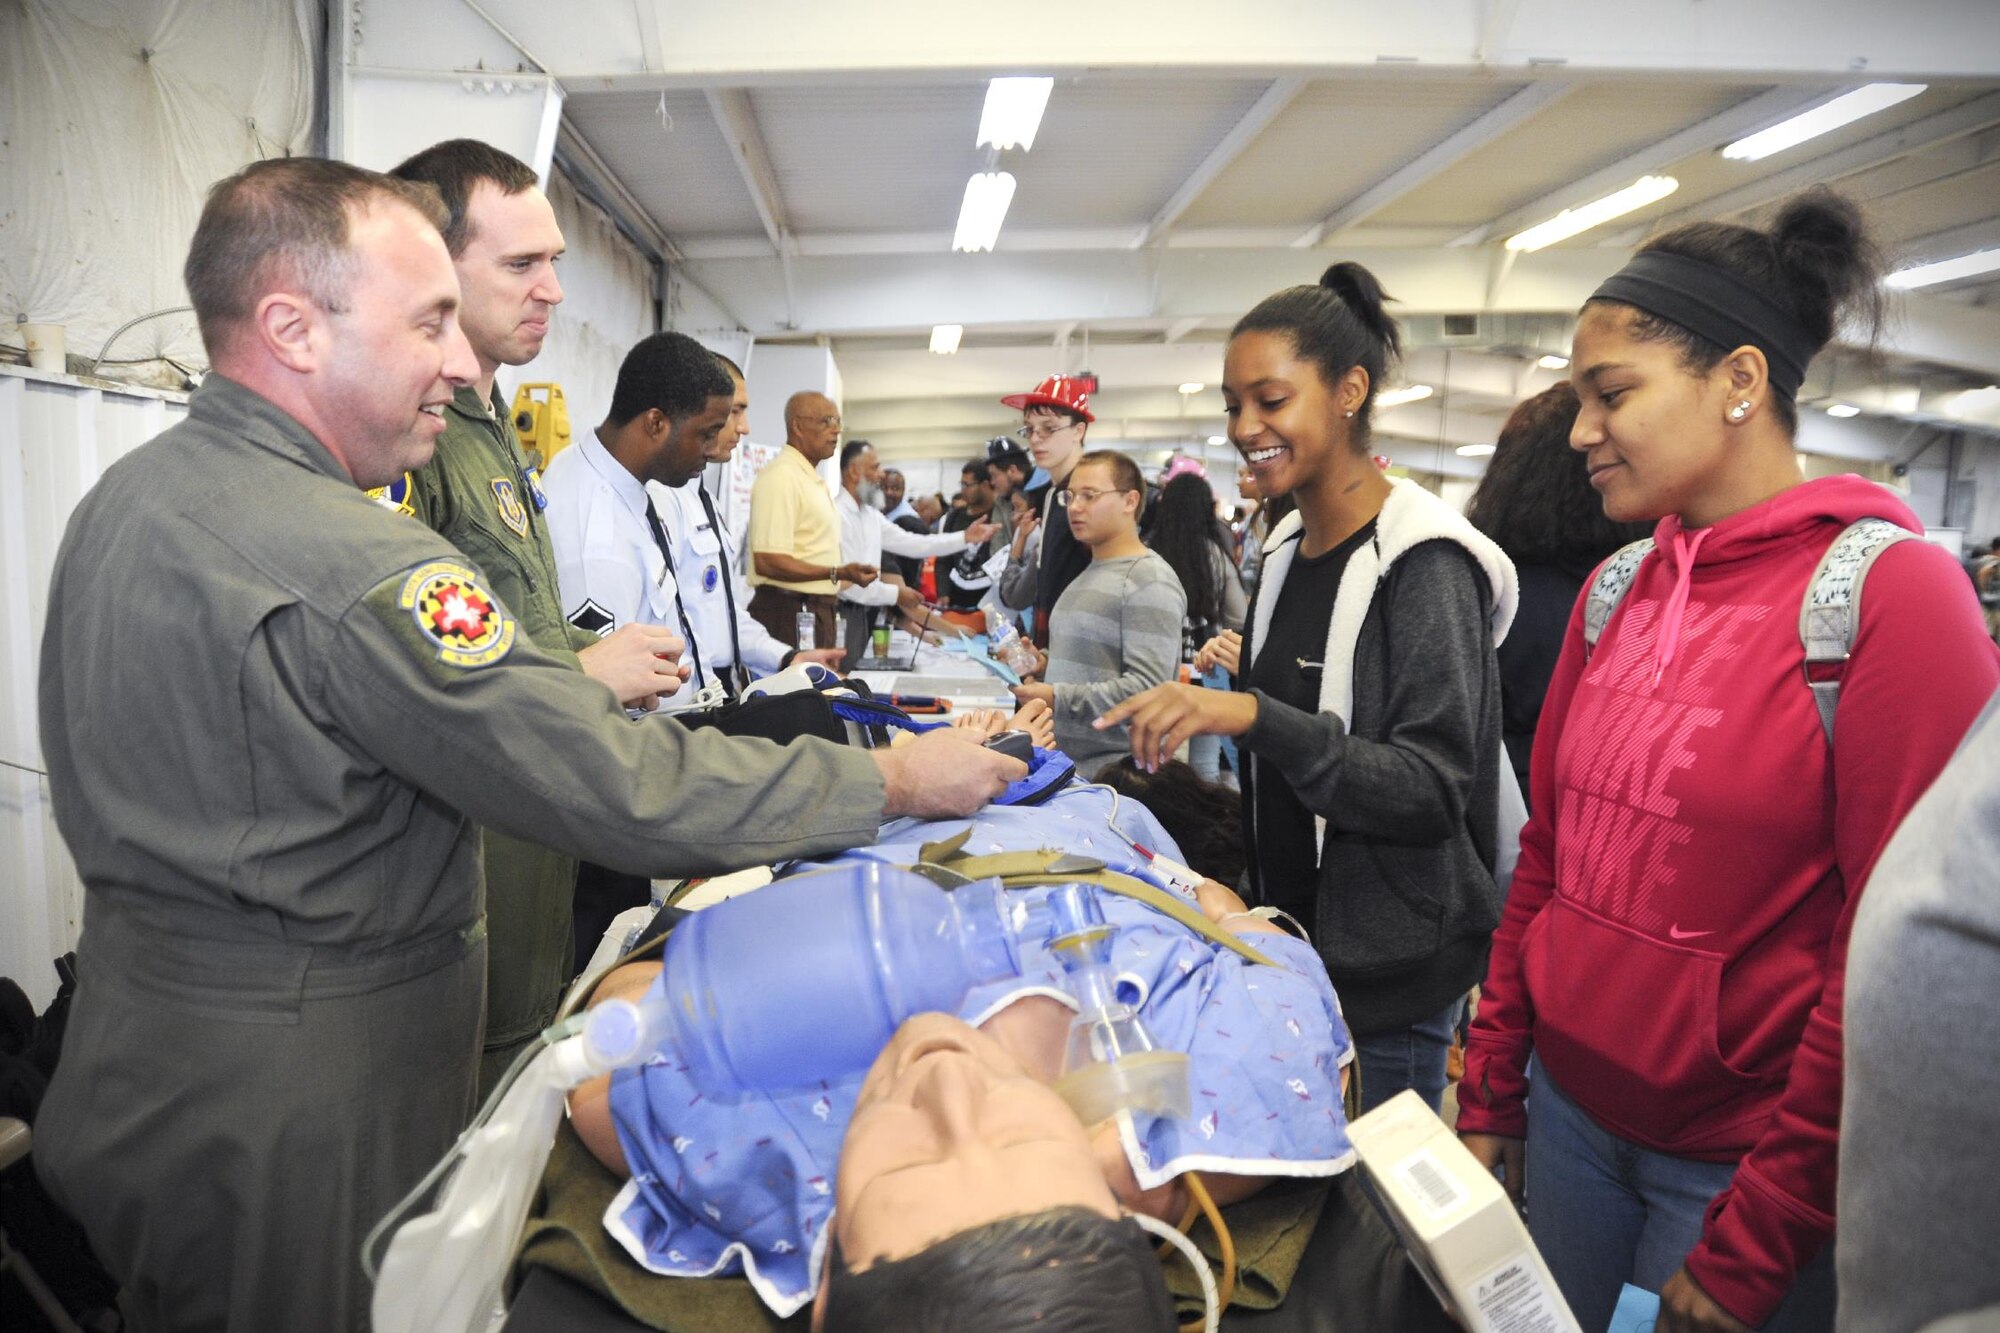 Members of the 459th Air Refueling Wing showcase their missions to a group of high school students at the Virginia Department of Transportation Career Fair in Manassas, Virginia, Thursday, Oct. 7, 2016. More than 1,400 students came out to talk with recruiters, a boom operator, aeromedical evacuation technician, and aeromedical staging squadron first sergeant about transportation-related careers in the Air Force Reserve and 459th ARW. (U.S.Air Force photo/Staff Sgt. Kat Justen)